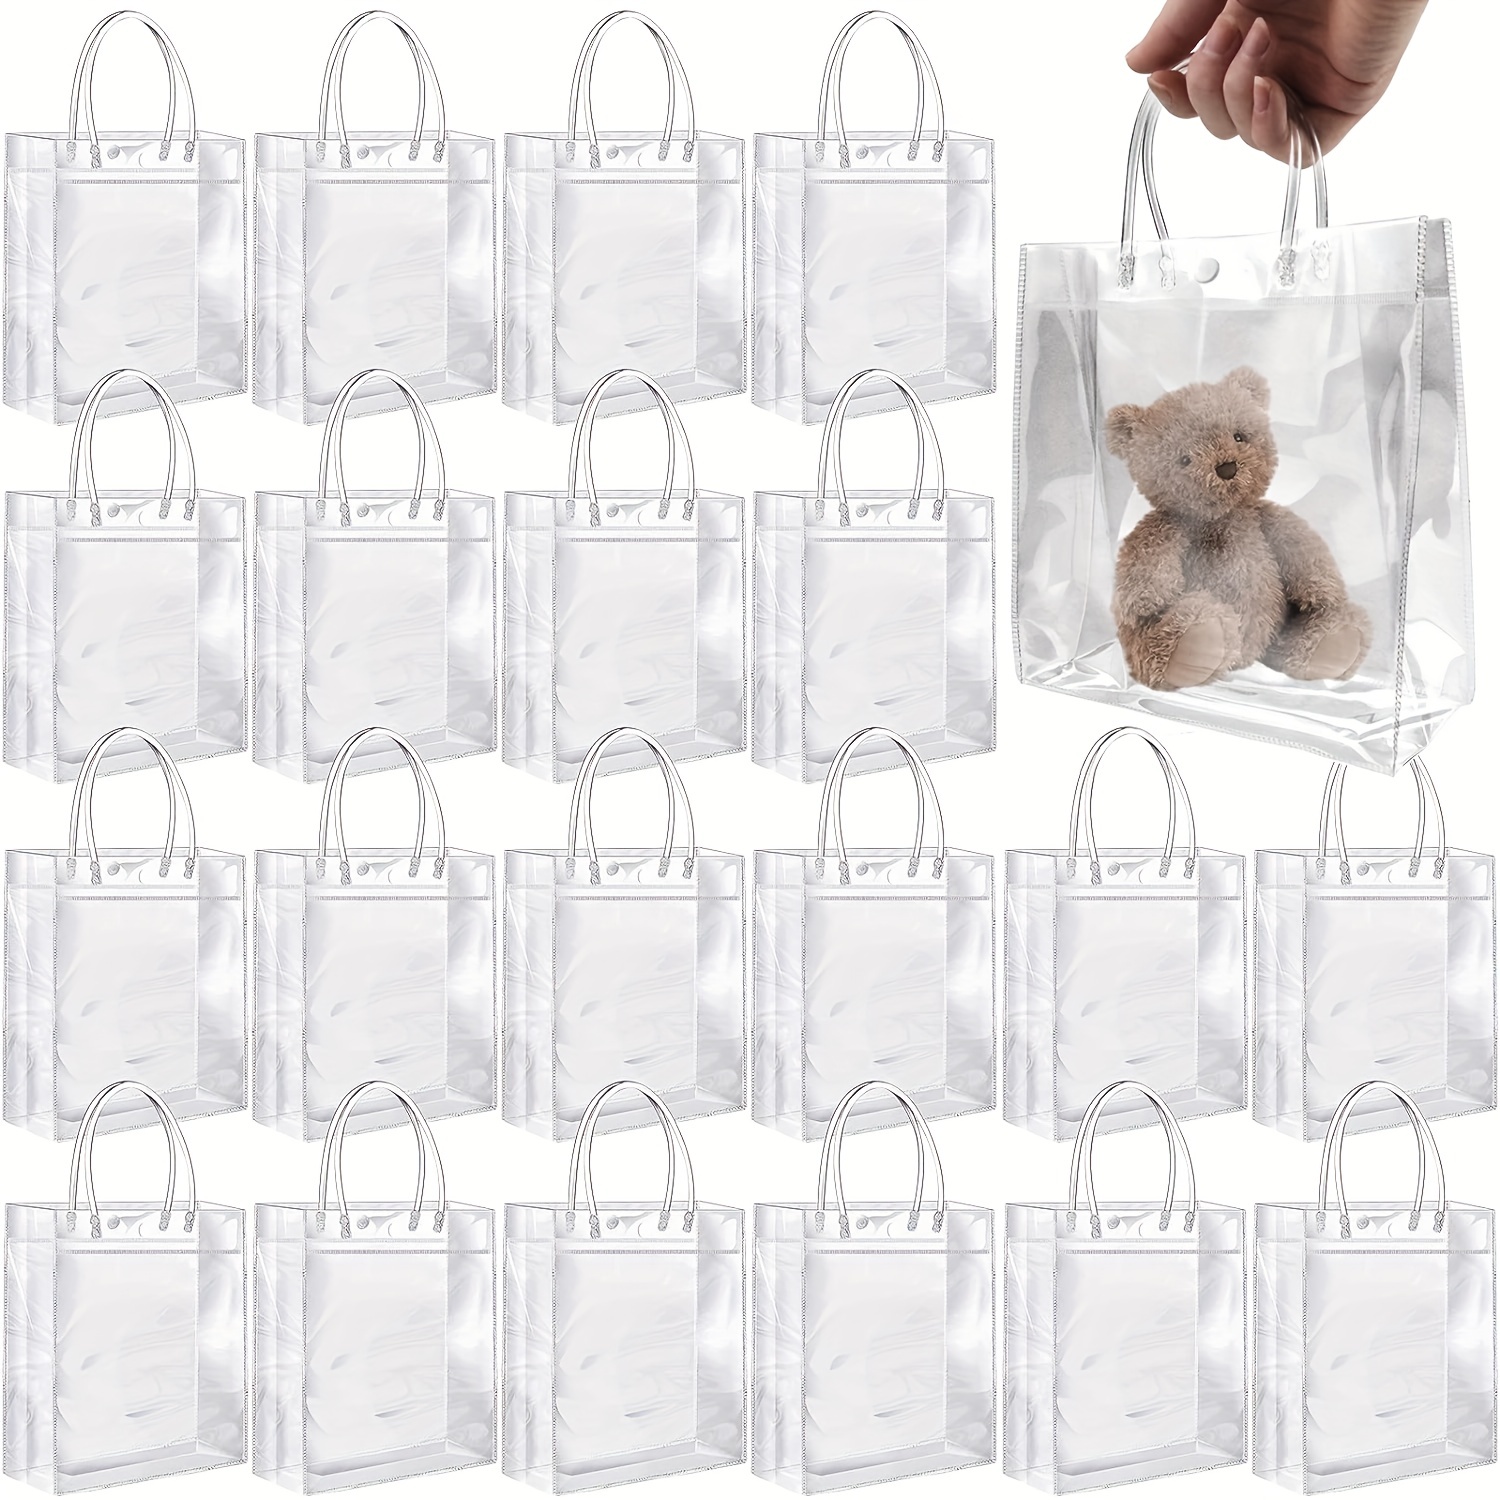 32 Pcs Clear PVC Gift Bags with Handle,Reusable Plastic Gift Wrap Bag Transparent Tote Bag for Shopping Retail Merchandise Boutique Wedding Birthday